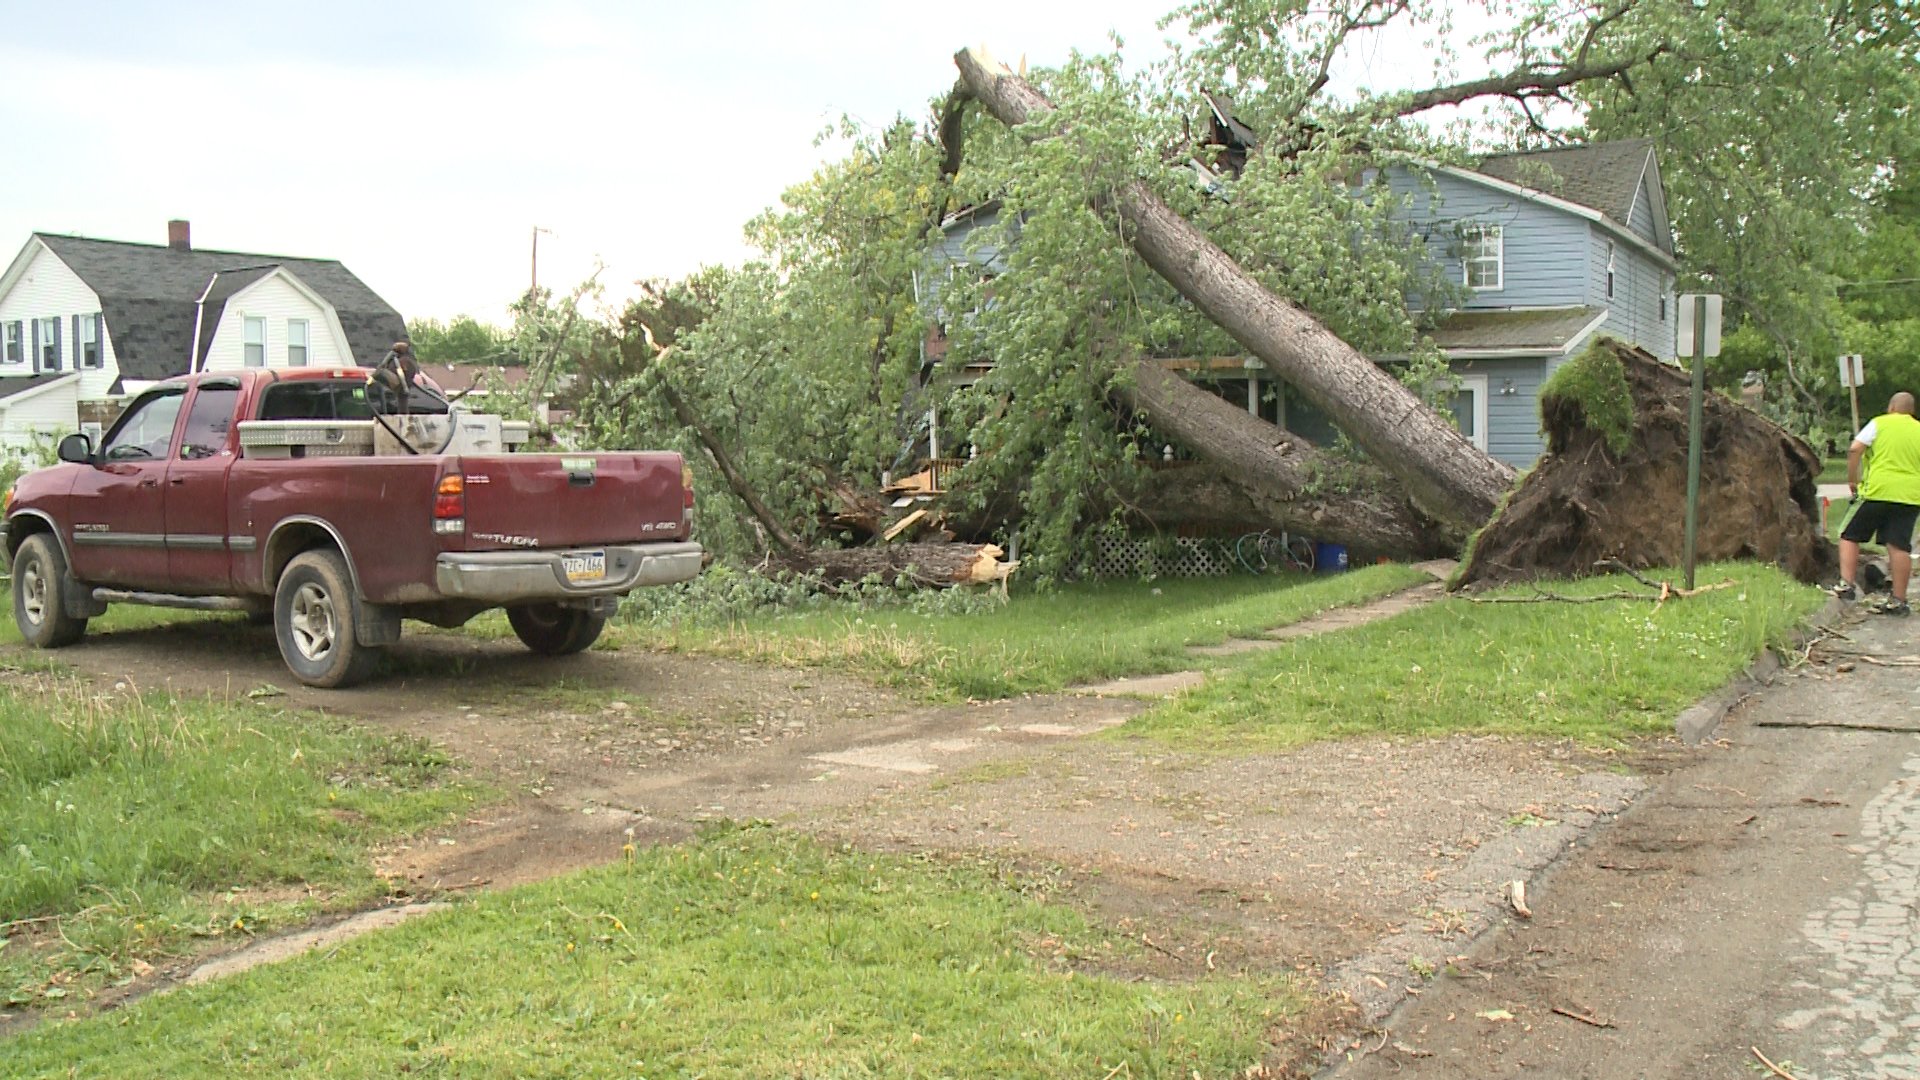 Tornado Damage Cleanup In Union City Erie News Now WICU and WSEE in